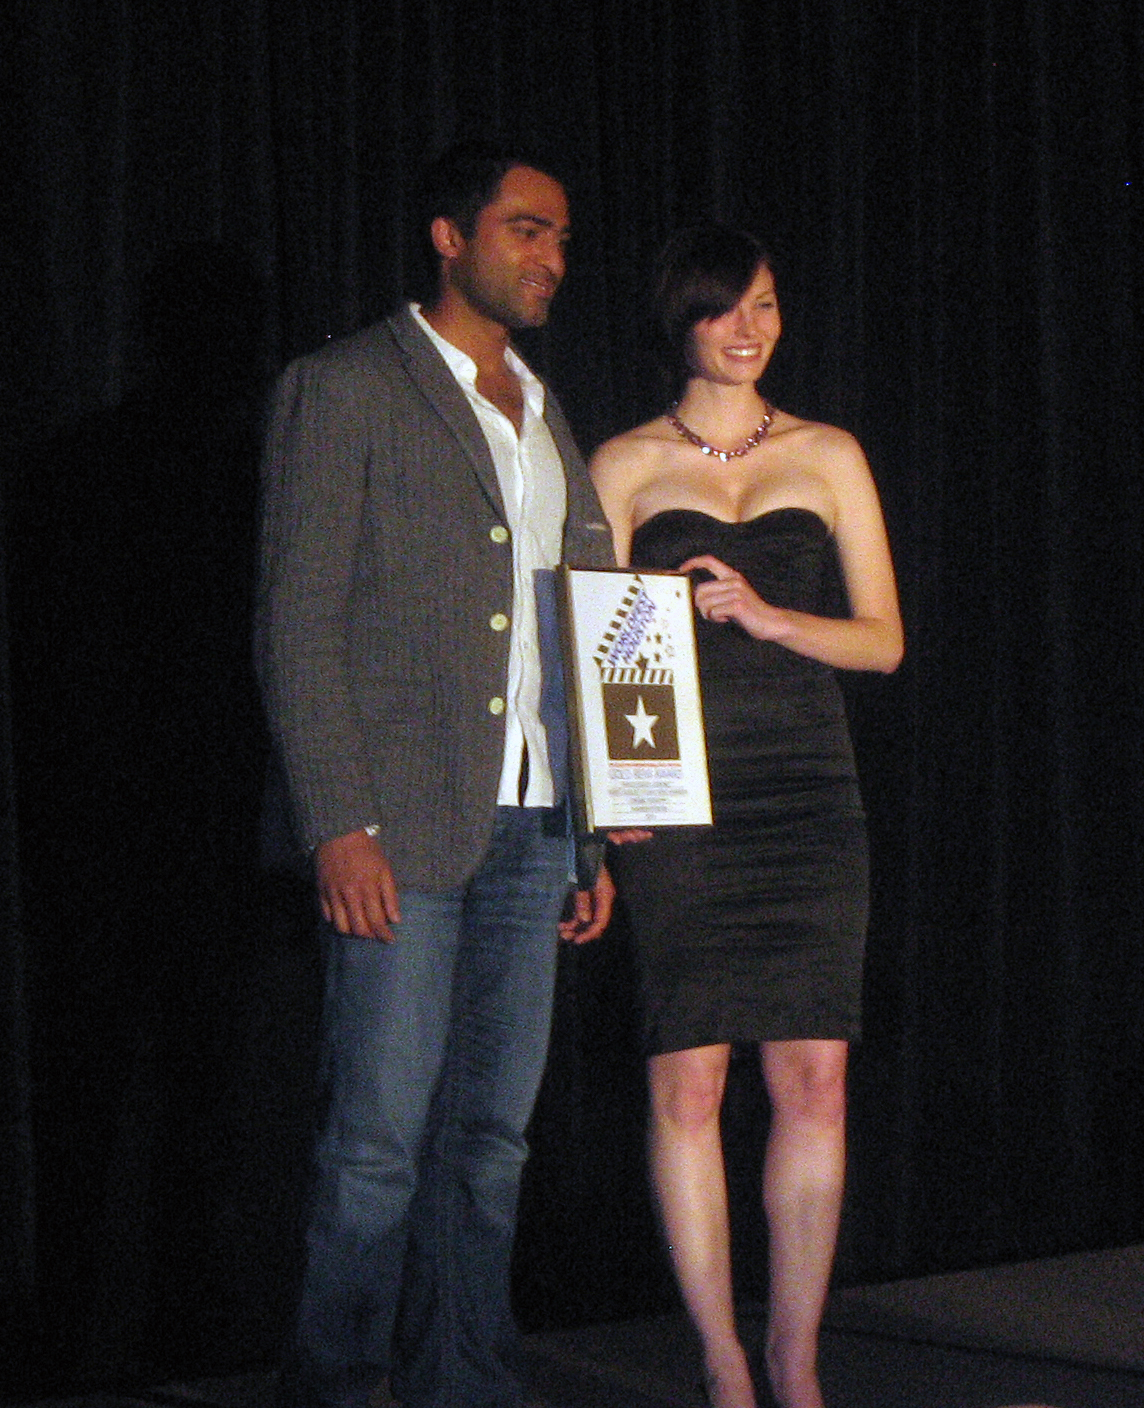 Pereira accepting Gold Remi award for WHO'S GOOD LOOKING at Houston World Fest April 2010.